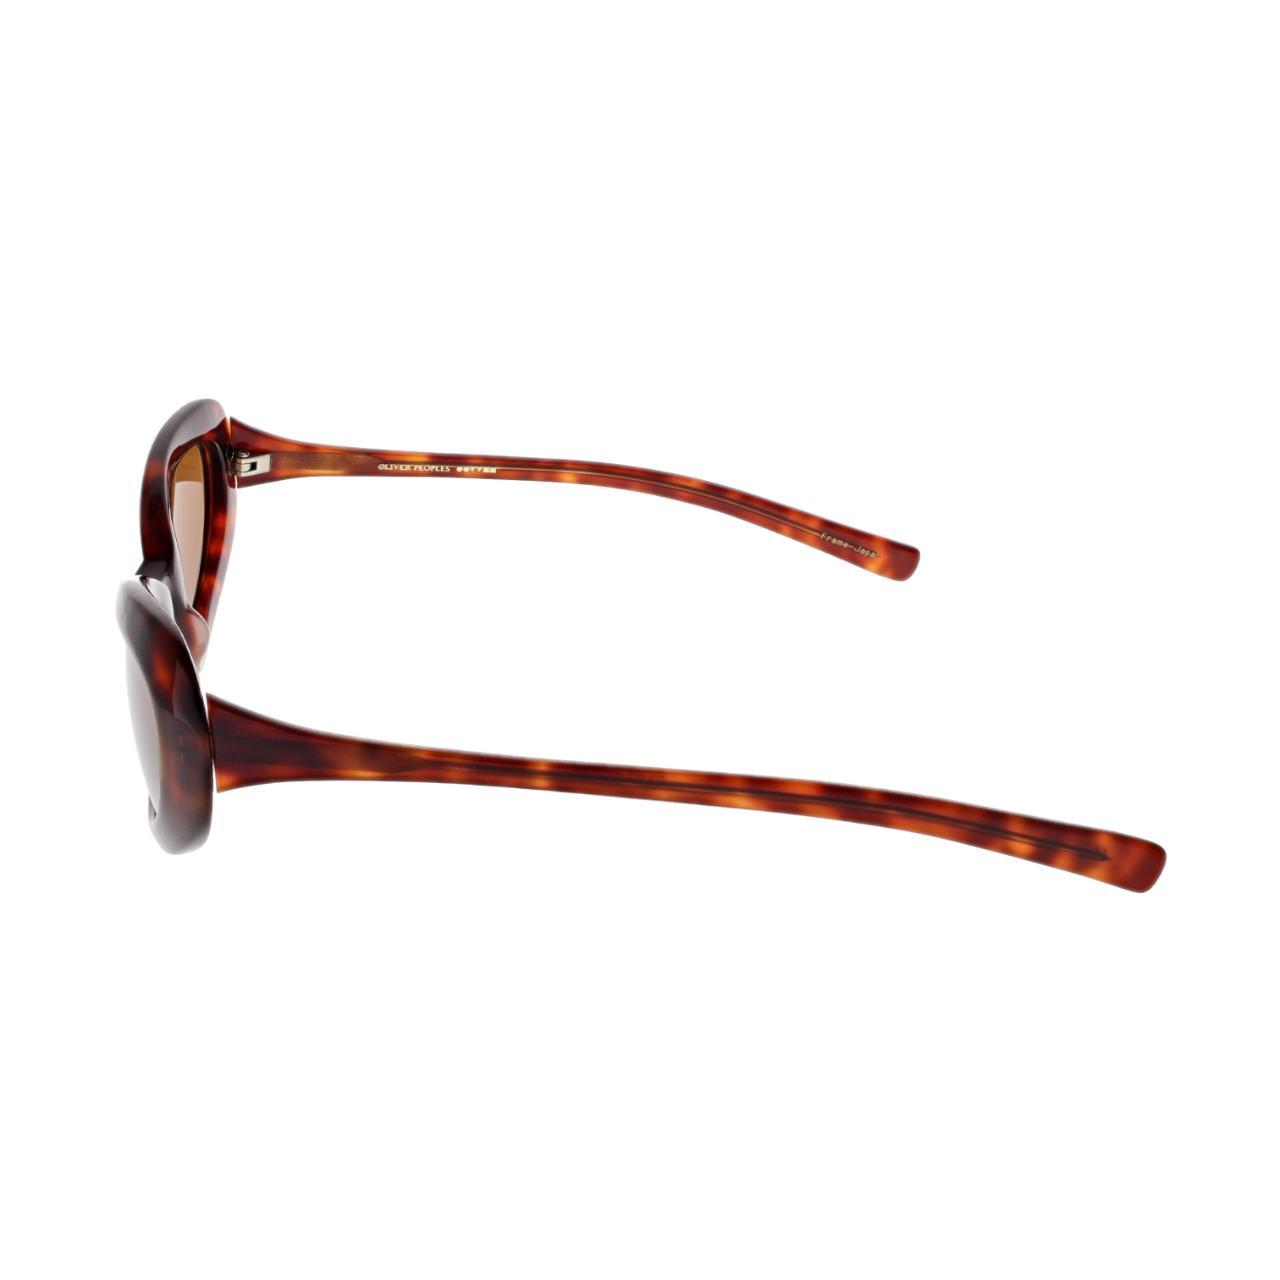 Product Image 3 - OLIVER PEOPLES RIVIERA SUNGLASSES

Oliver Peoples